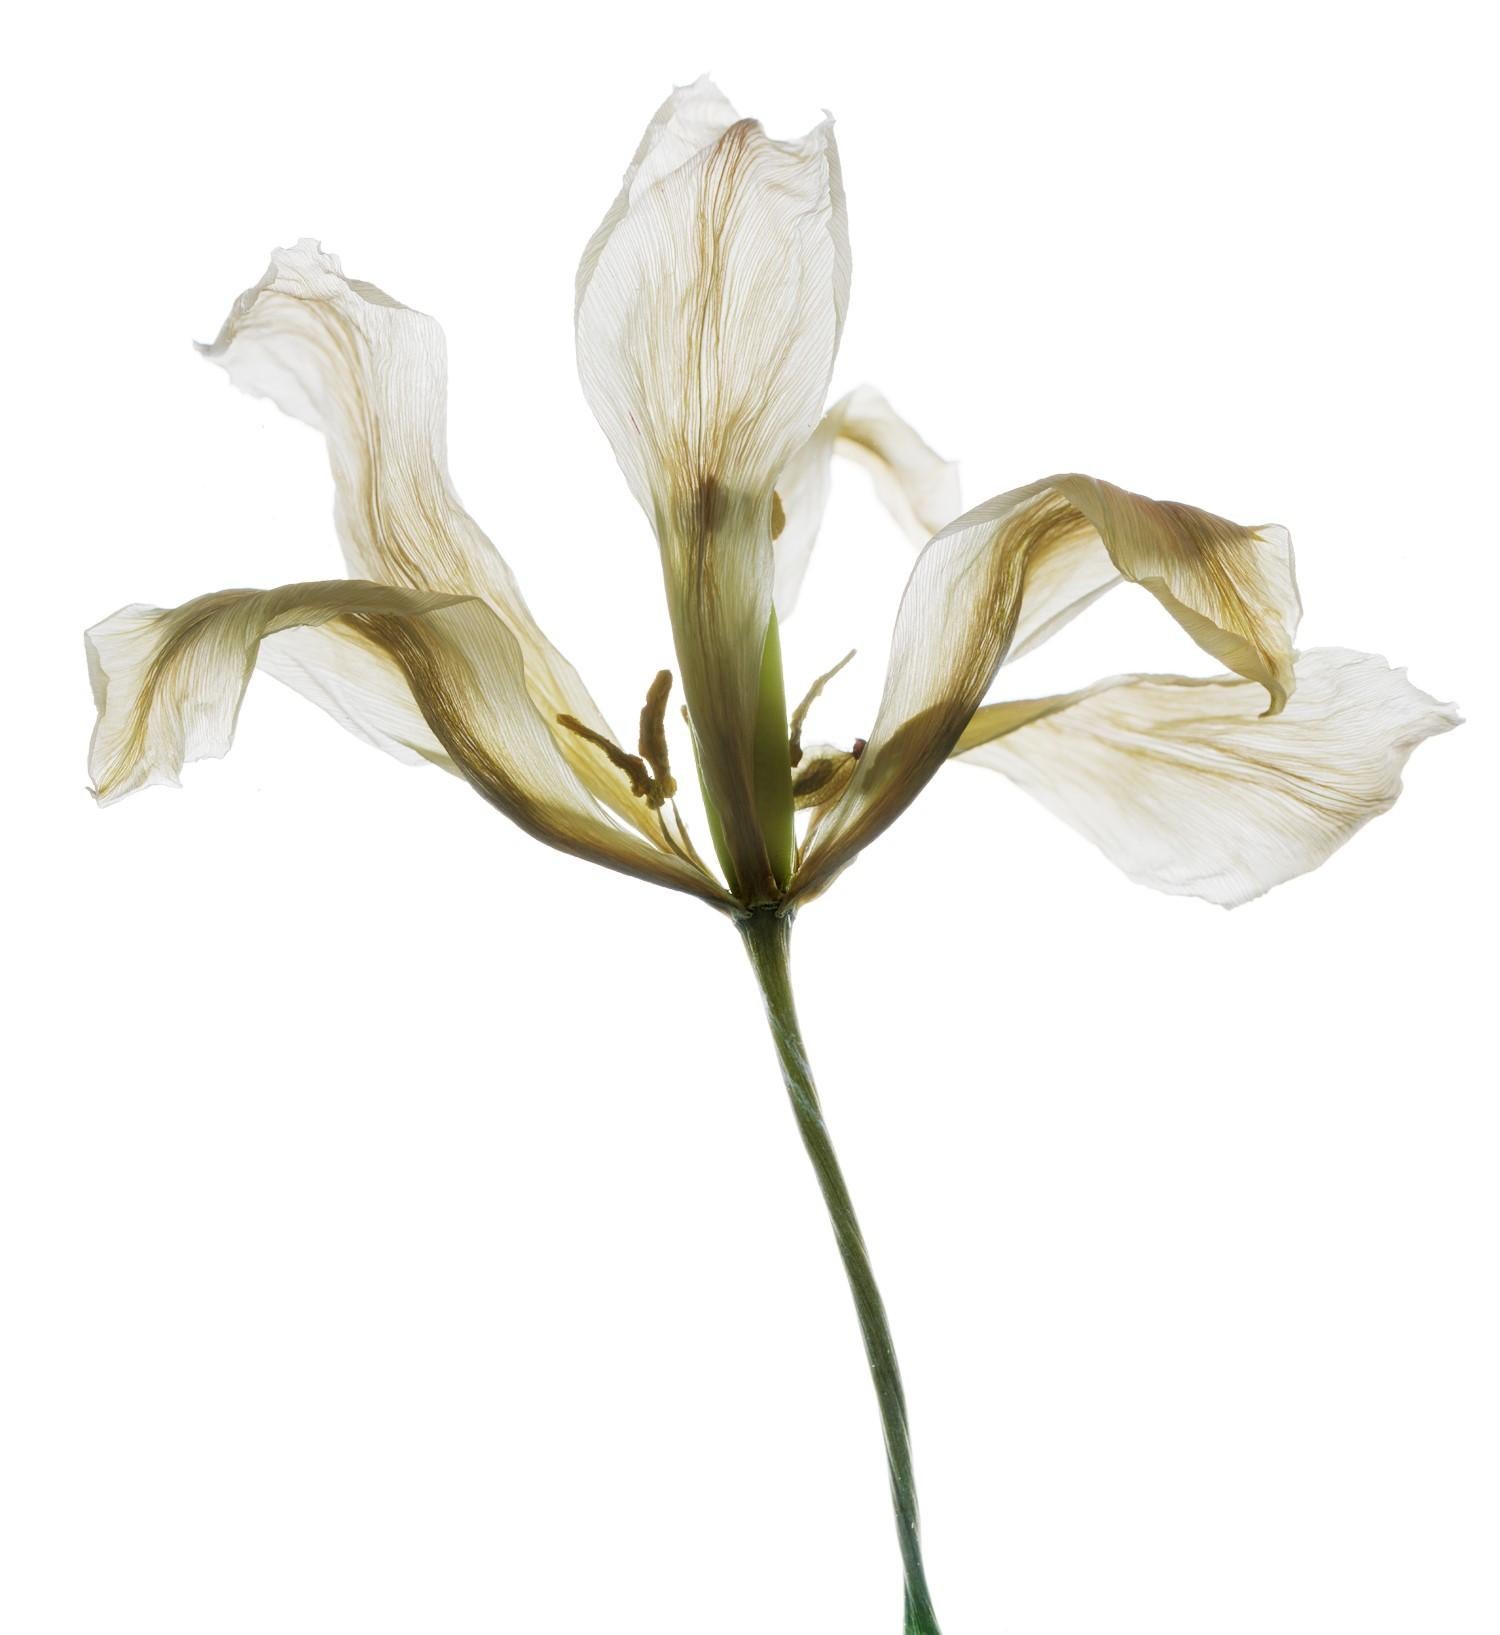 Chad Kleitsch Color Photograph - Number 149 White (Still Life Photograph of Tulip Flower on White) 